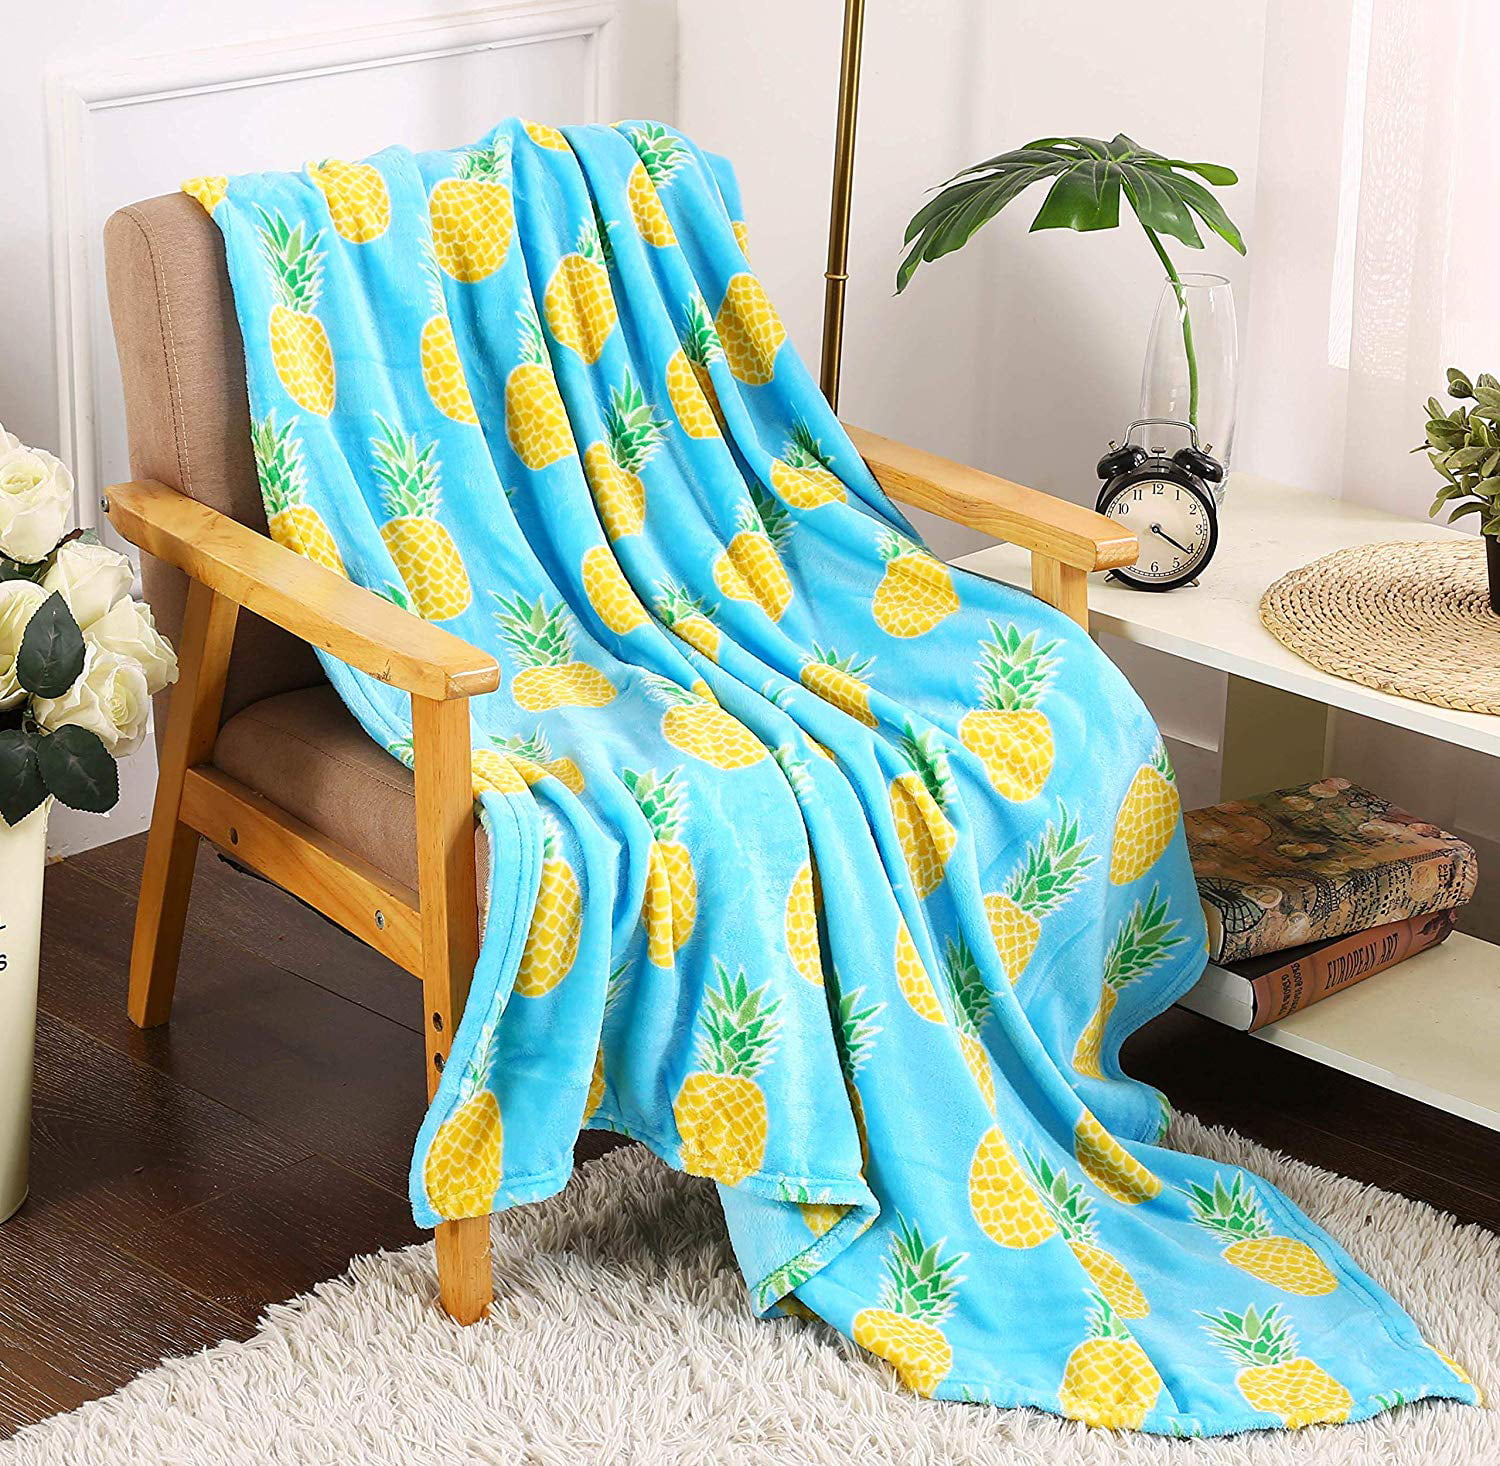 Singingin Ultra Soft Flannel Fleece Bed Blanket Summer Theme Tropical Green Pineapple Throw Blanket All Season Warm Fuzzy Light Weight Cozy Plush Blankets for Living Room/Bedroom 40 x 50